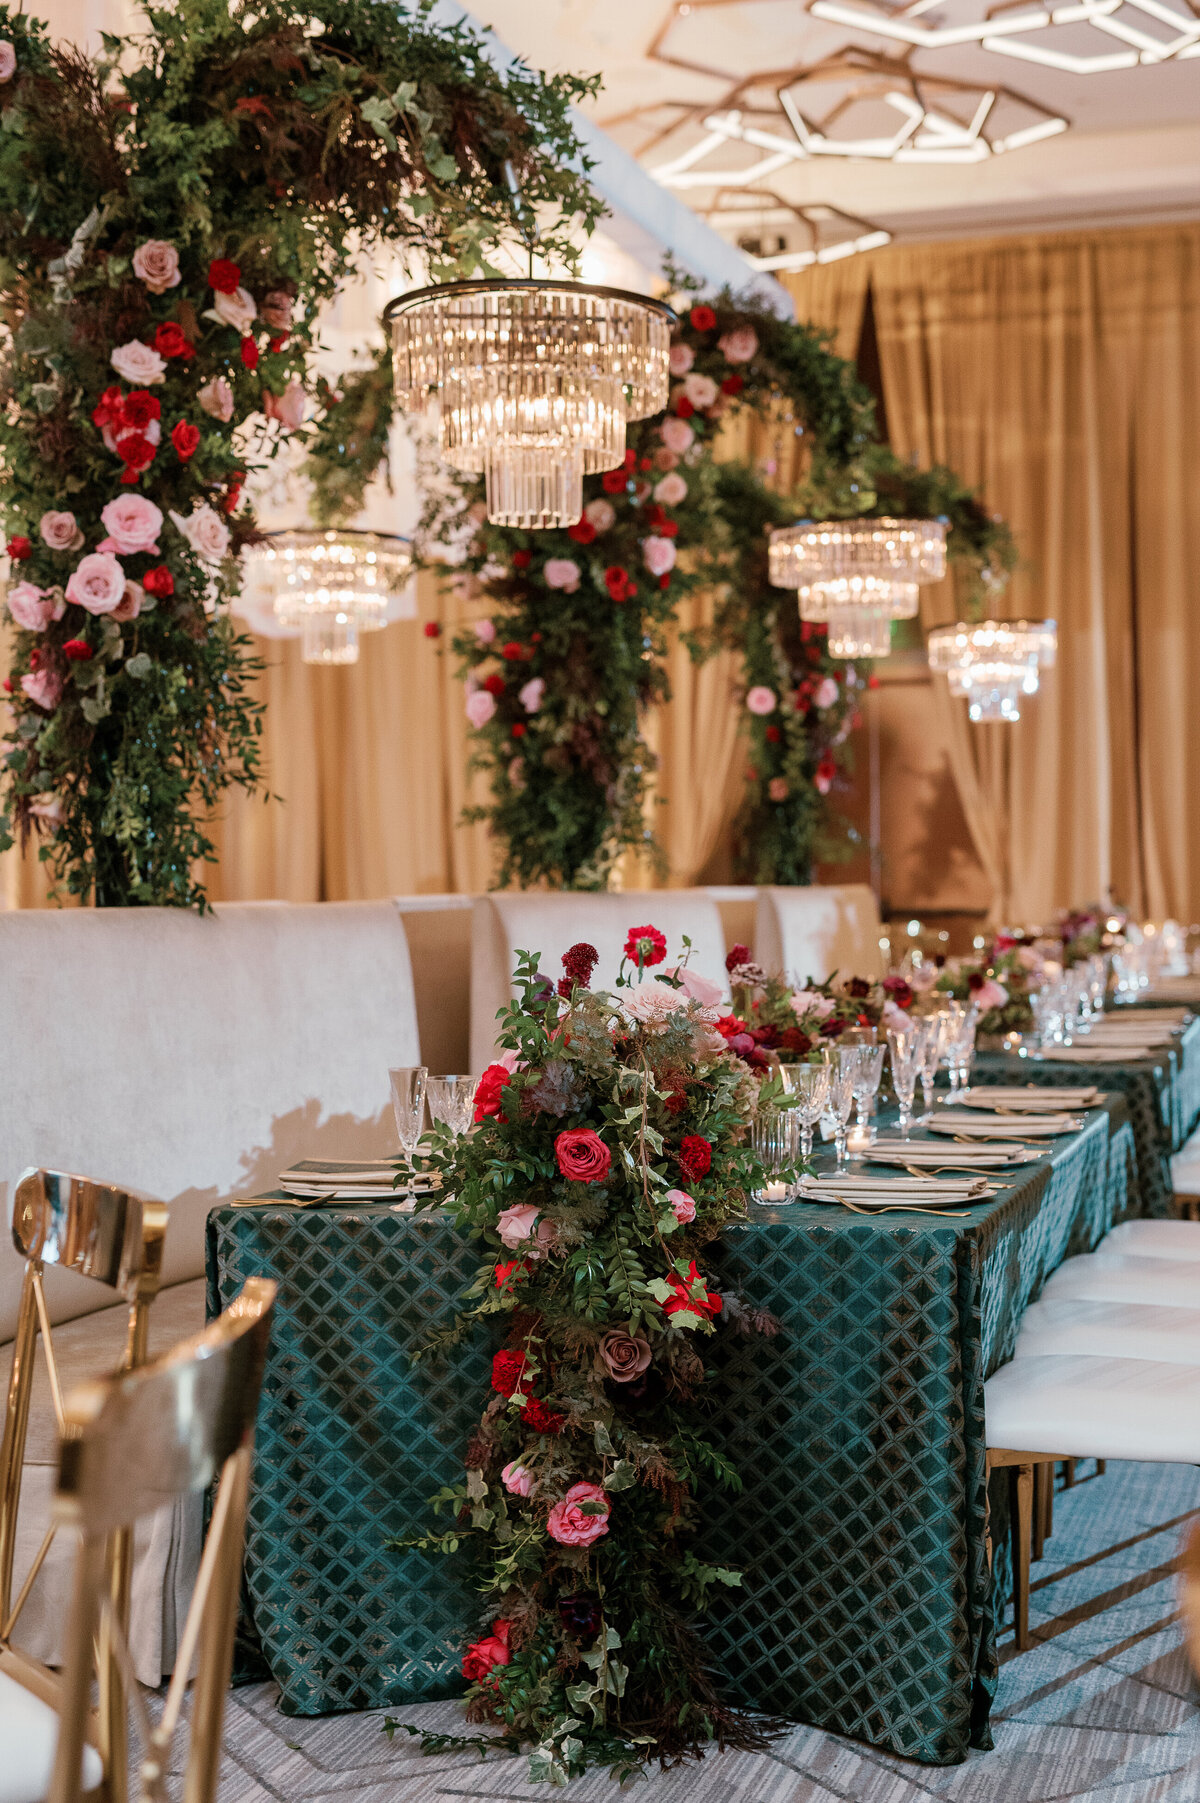 Standing chandeliers covered in lush florals for winter wedding at the Four Seasons. Jewel tone wedding reception florals with reception table floral cascades. Winter floral colors in ruby, blush, plum, and magenta. Design by Rosemary & Finch Floral Design.